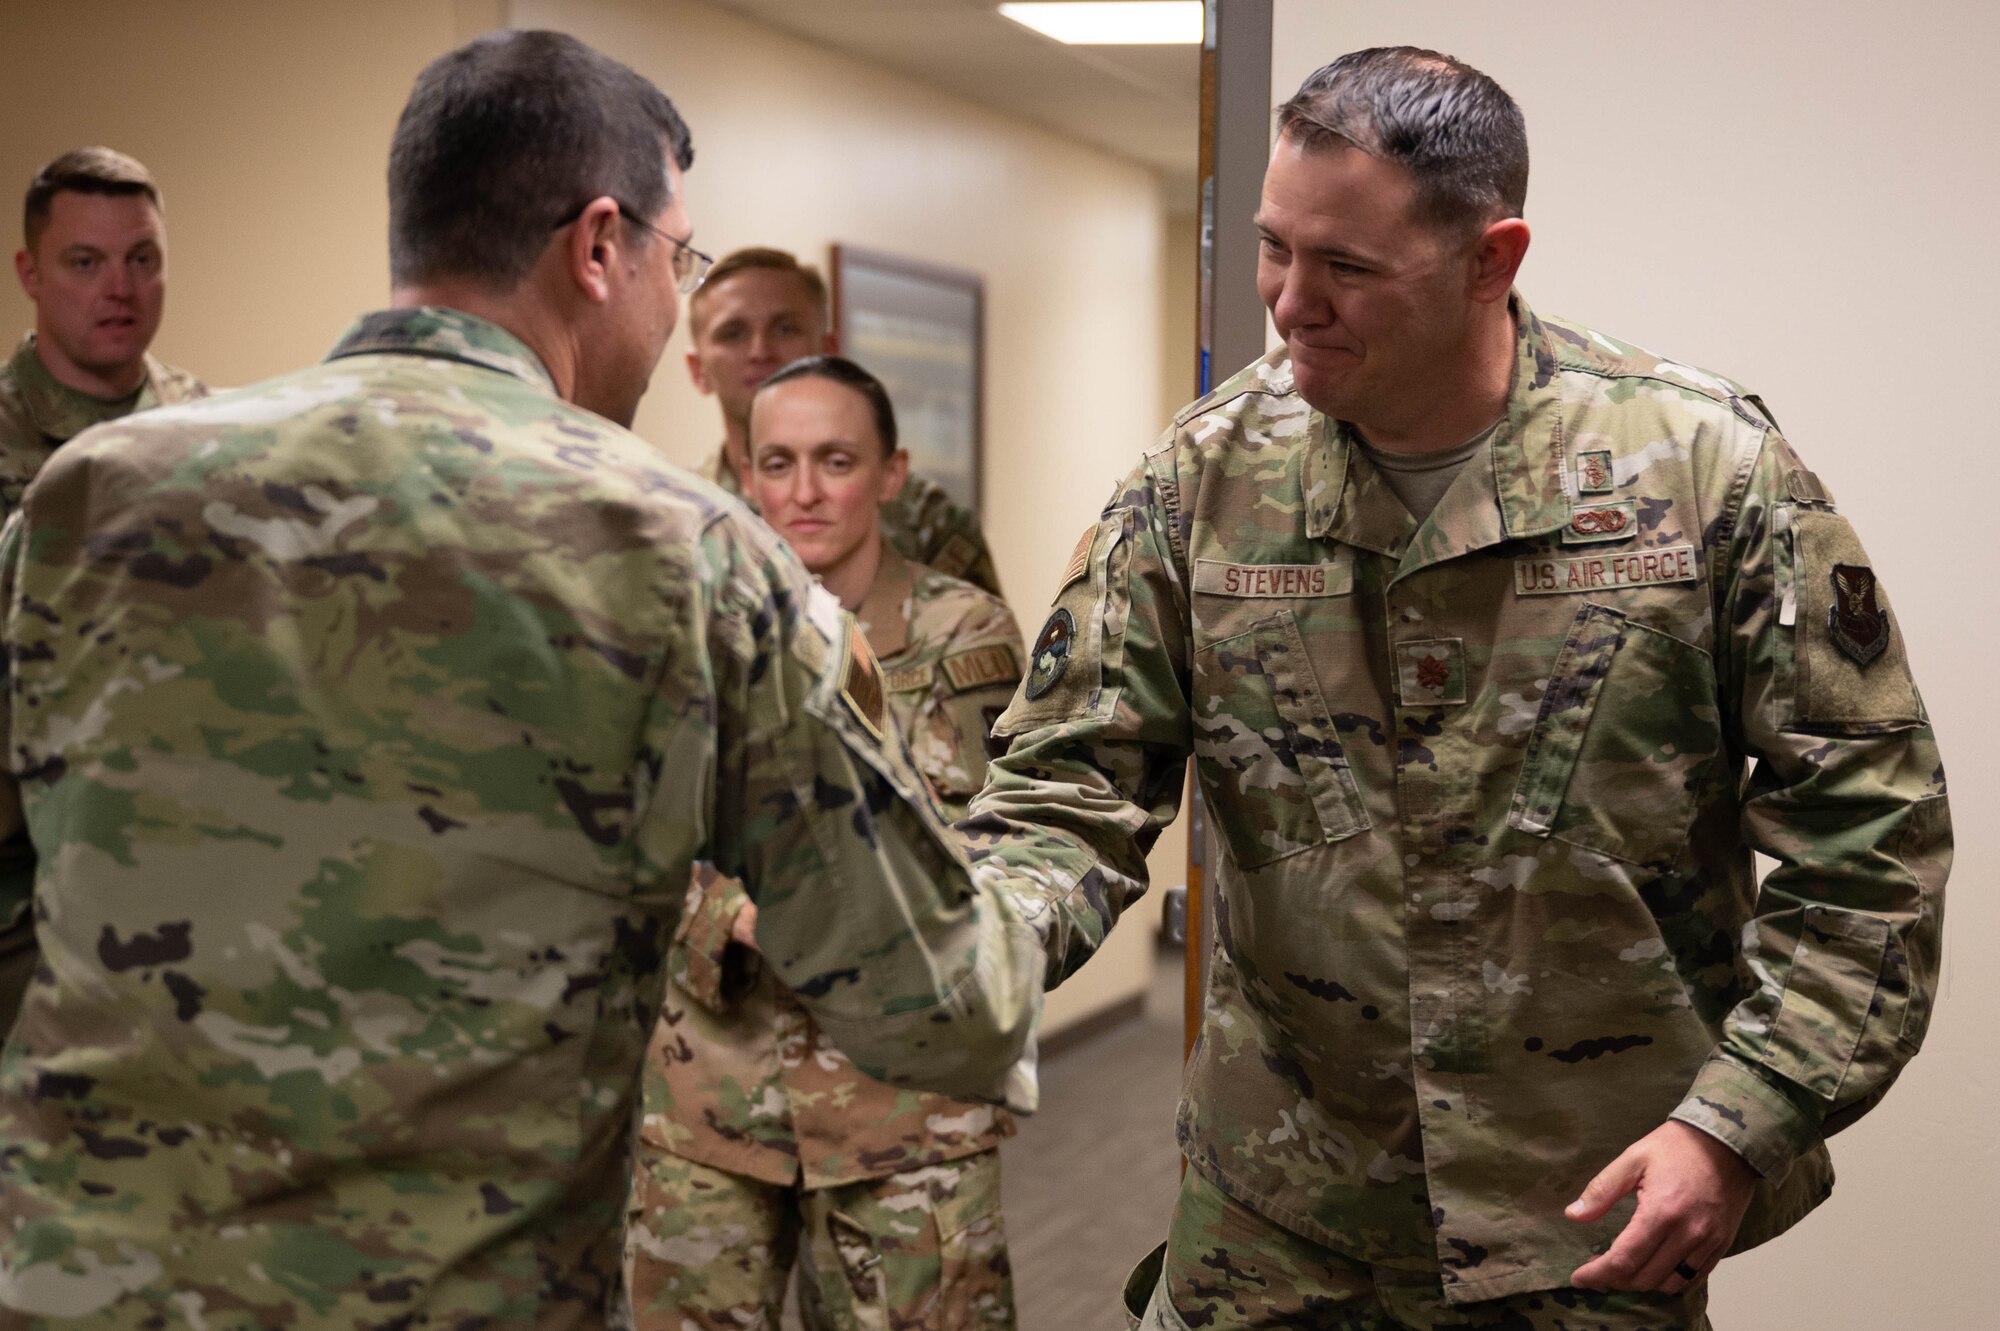 Maj. Charlie Stevens, assigned to the 28th Bomb Wing, receives a coin from Maj. Gen. Andrew Gebara, 8th Air Force and Joint-Global Strike Operations Center commander, at Ellsworth Air Force Base, S.D., Oct. 17, 2022. Coining’s are traditionally used to reward and recognize service members for their exceptional work inside and outside of the workplace. (U.S. Air Force photo by Staff Sgt. Alexi Bosarge)